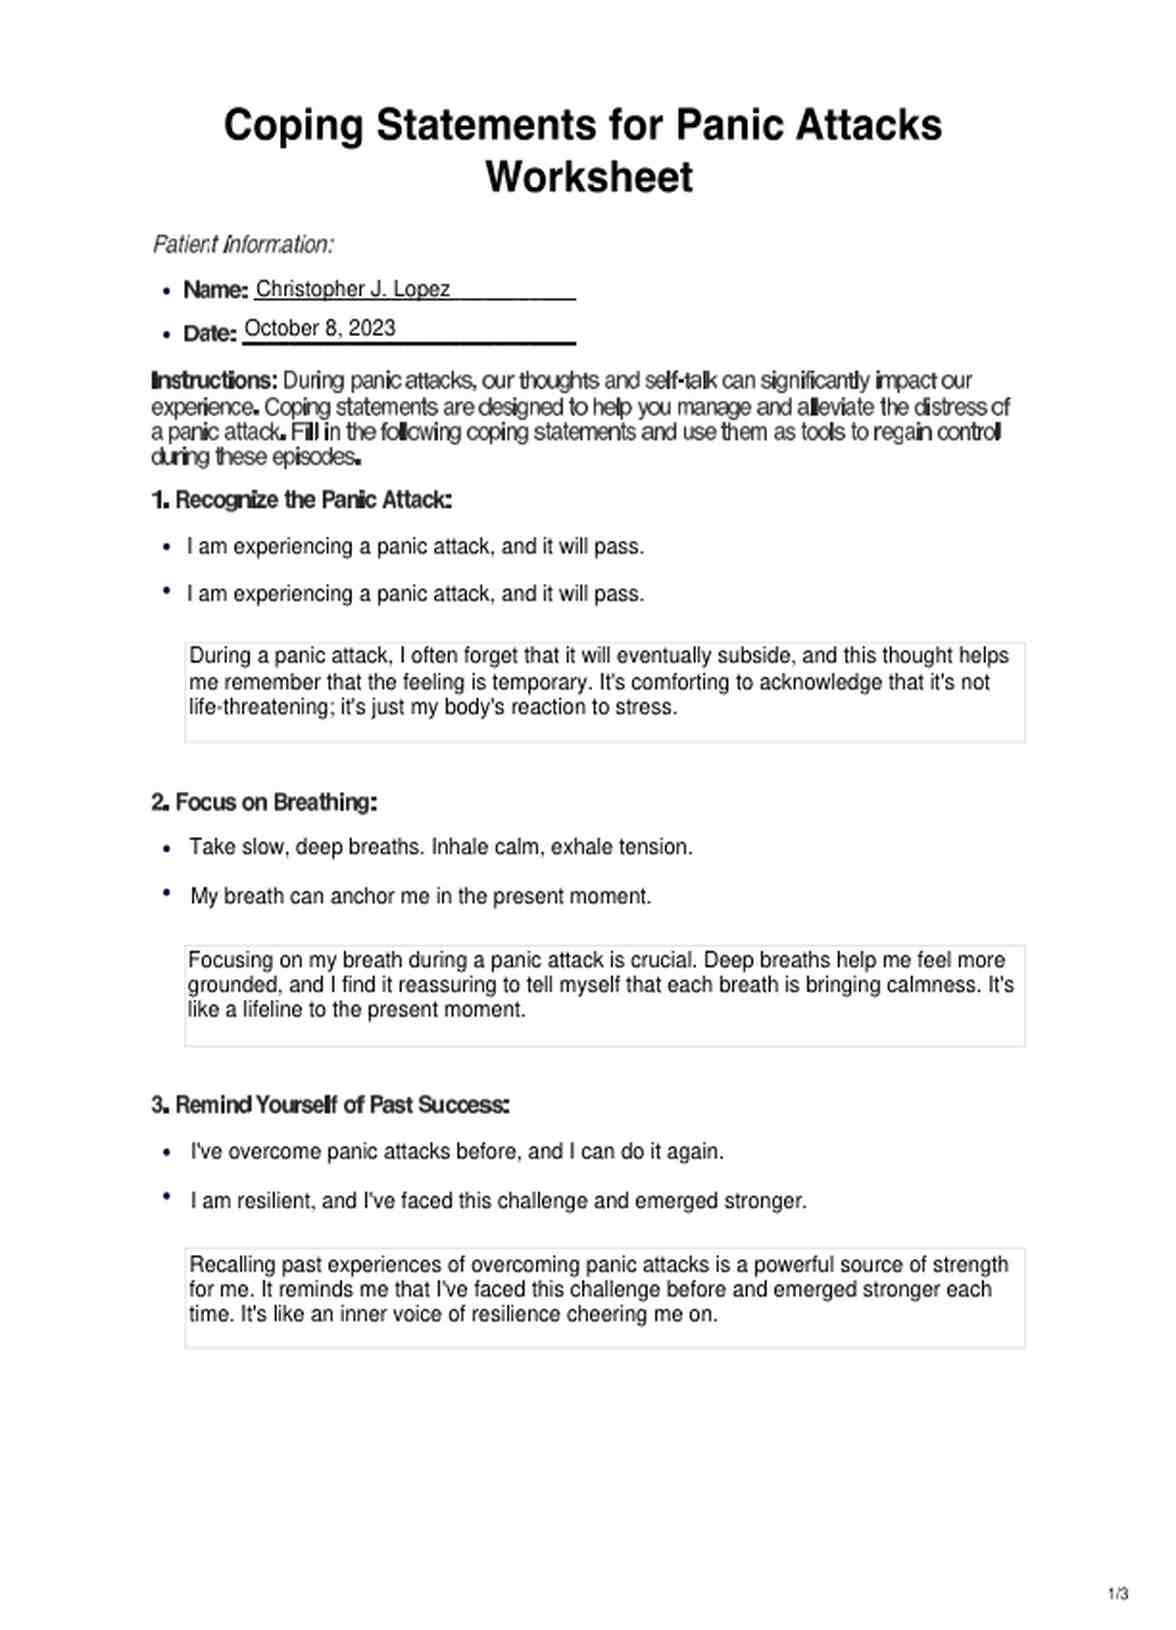 Coping Statements for Panic Attacks Worksheet PDF Example